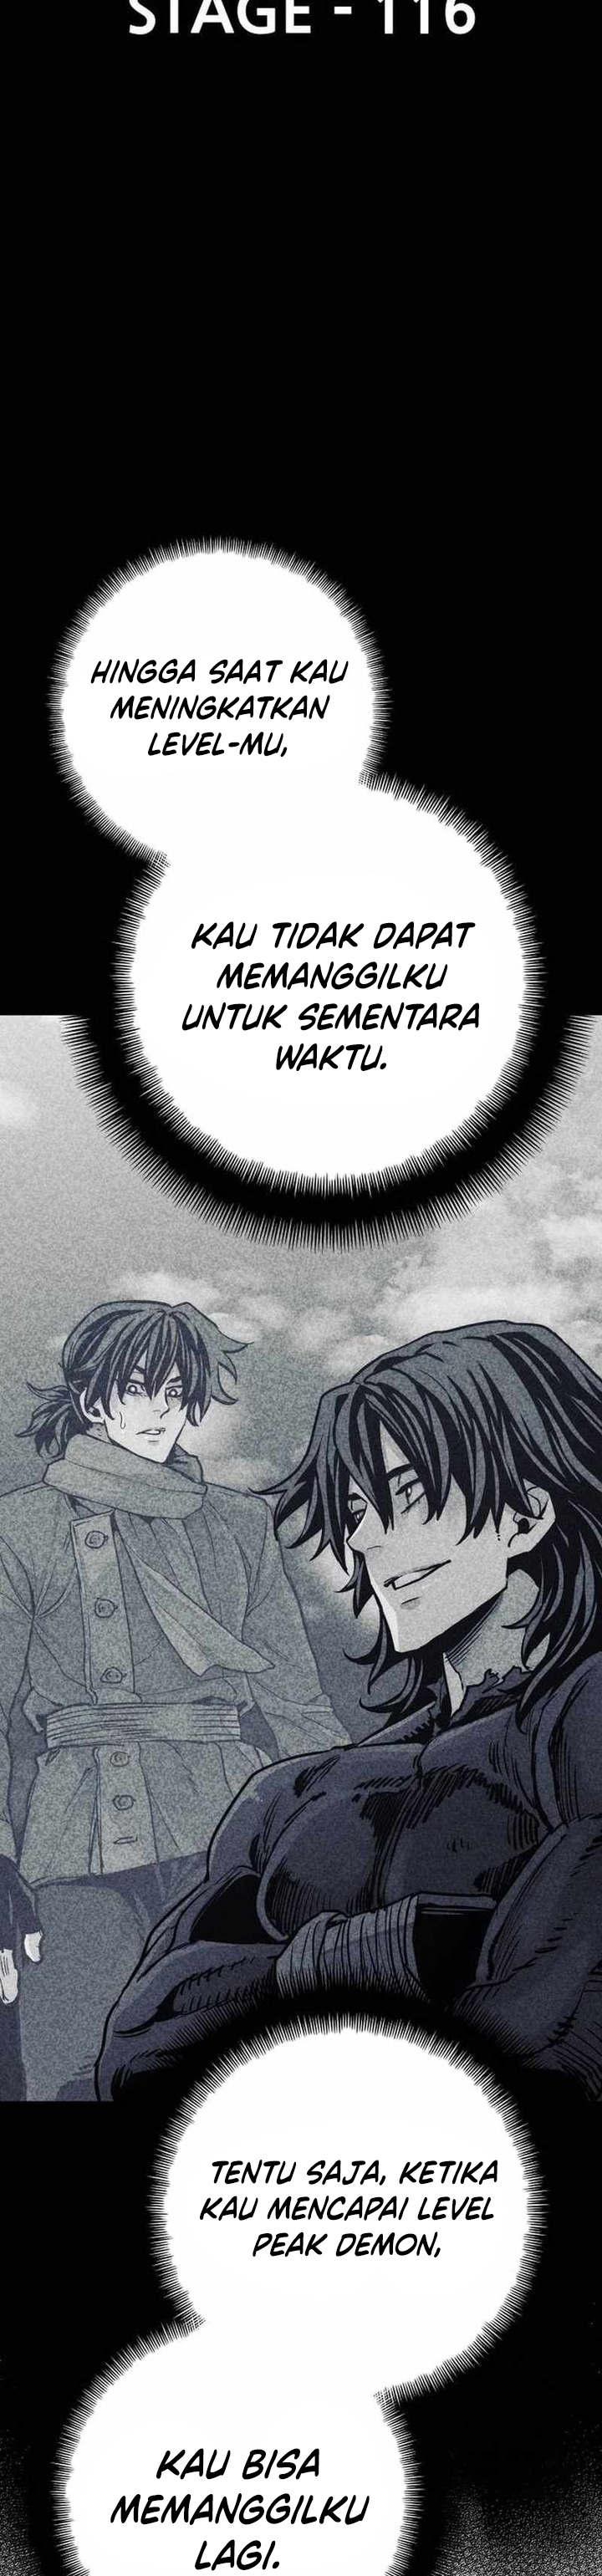 Heavenly Demon Cultivation Simulation Chapter 116